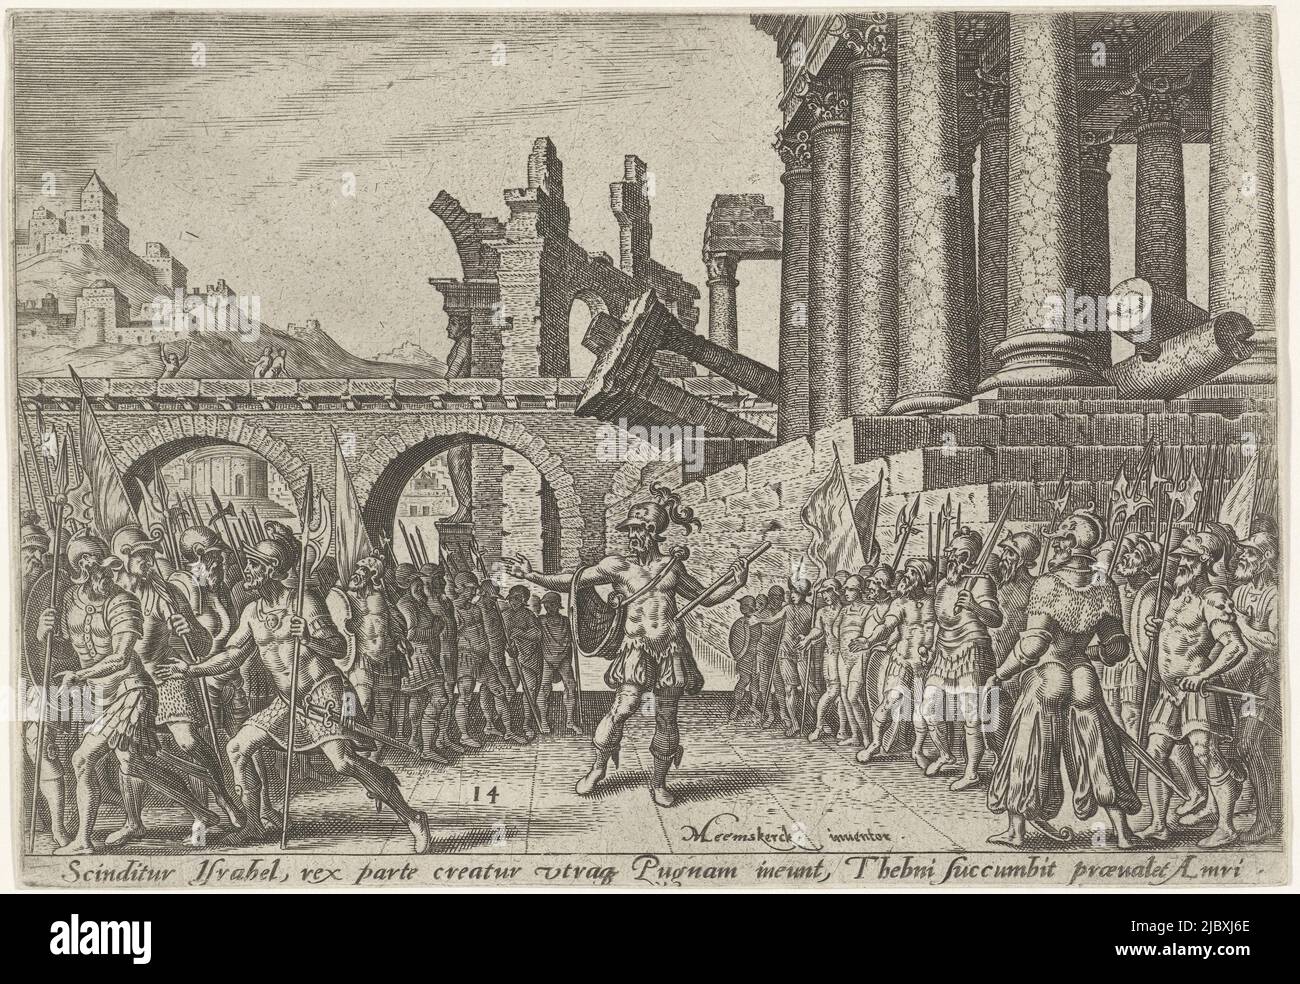 One part of the people wants Tibni as king, the other part is for Omri. In front of the temple and destroyed city, the people are divided into two groups, The people of Israel divided between Tibni and Omri The doomsday of the Jewish people (series title), print maker: Philips Galle, Maarten van Heemskerck, (mentioned on object), Haarlem, 1569, paper, engraving, h 141 mm × w 203 mm Stock Photo